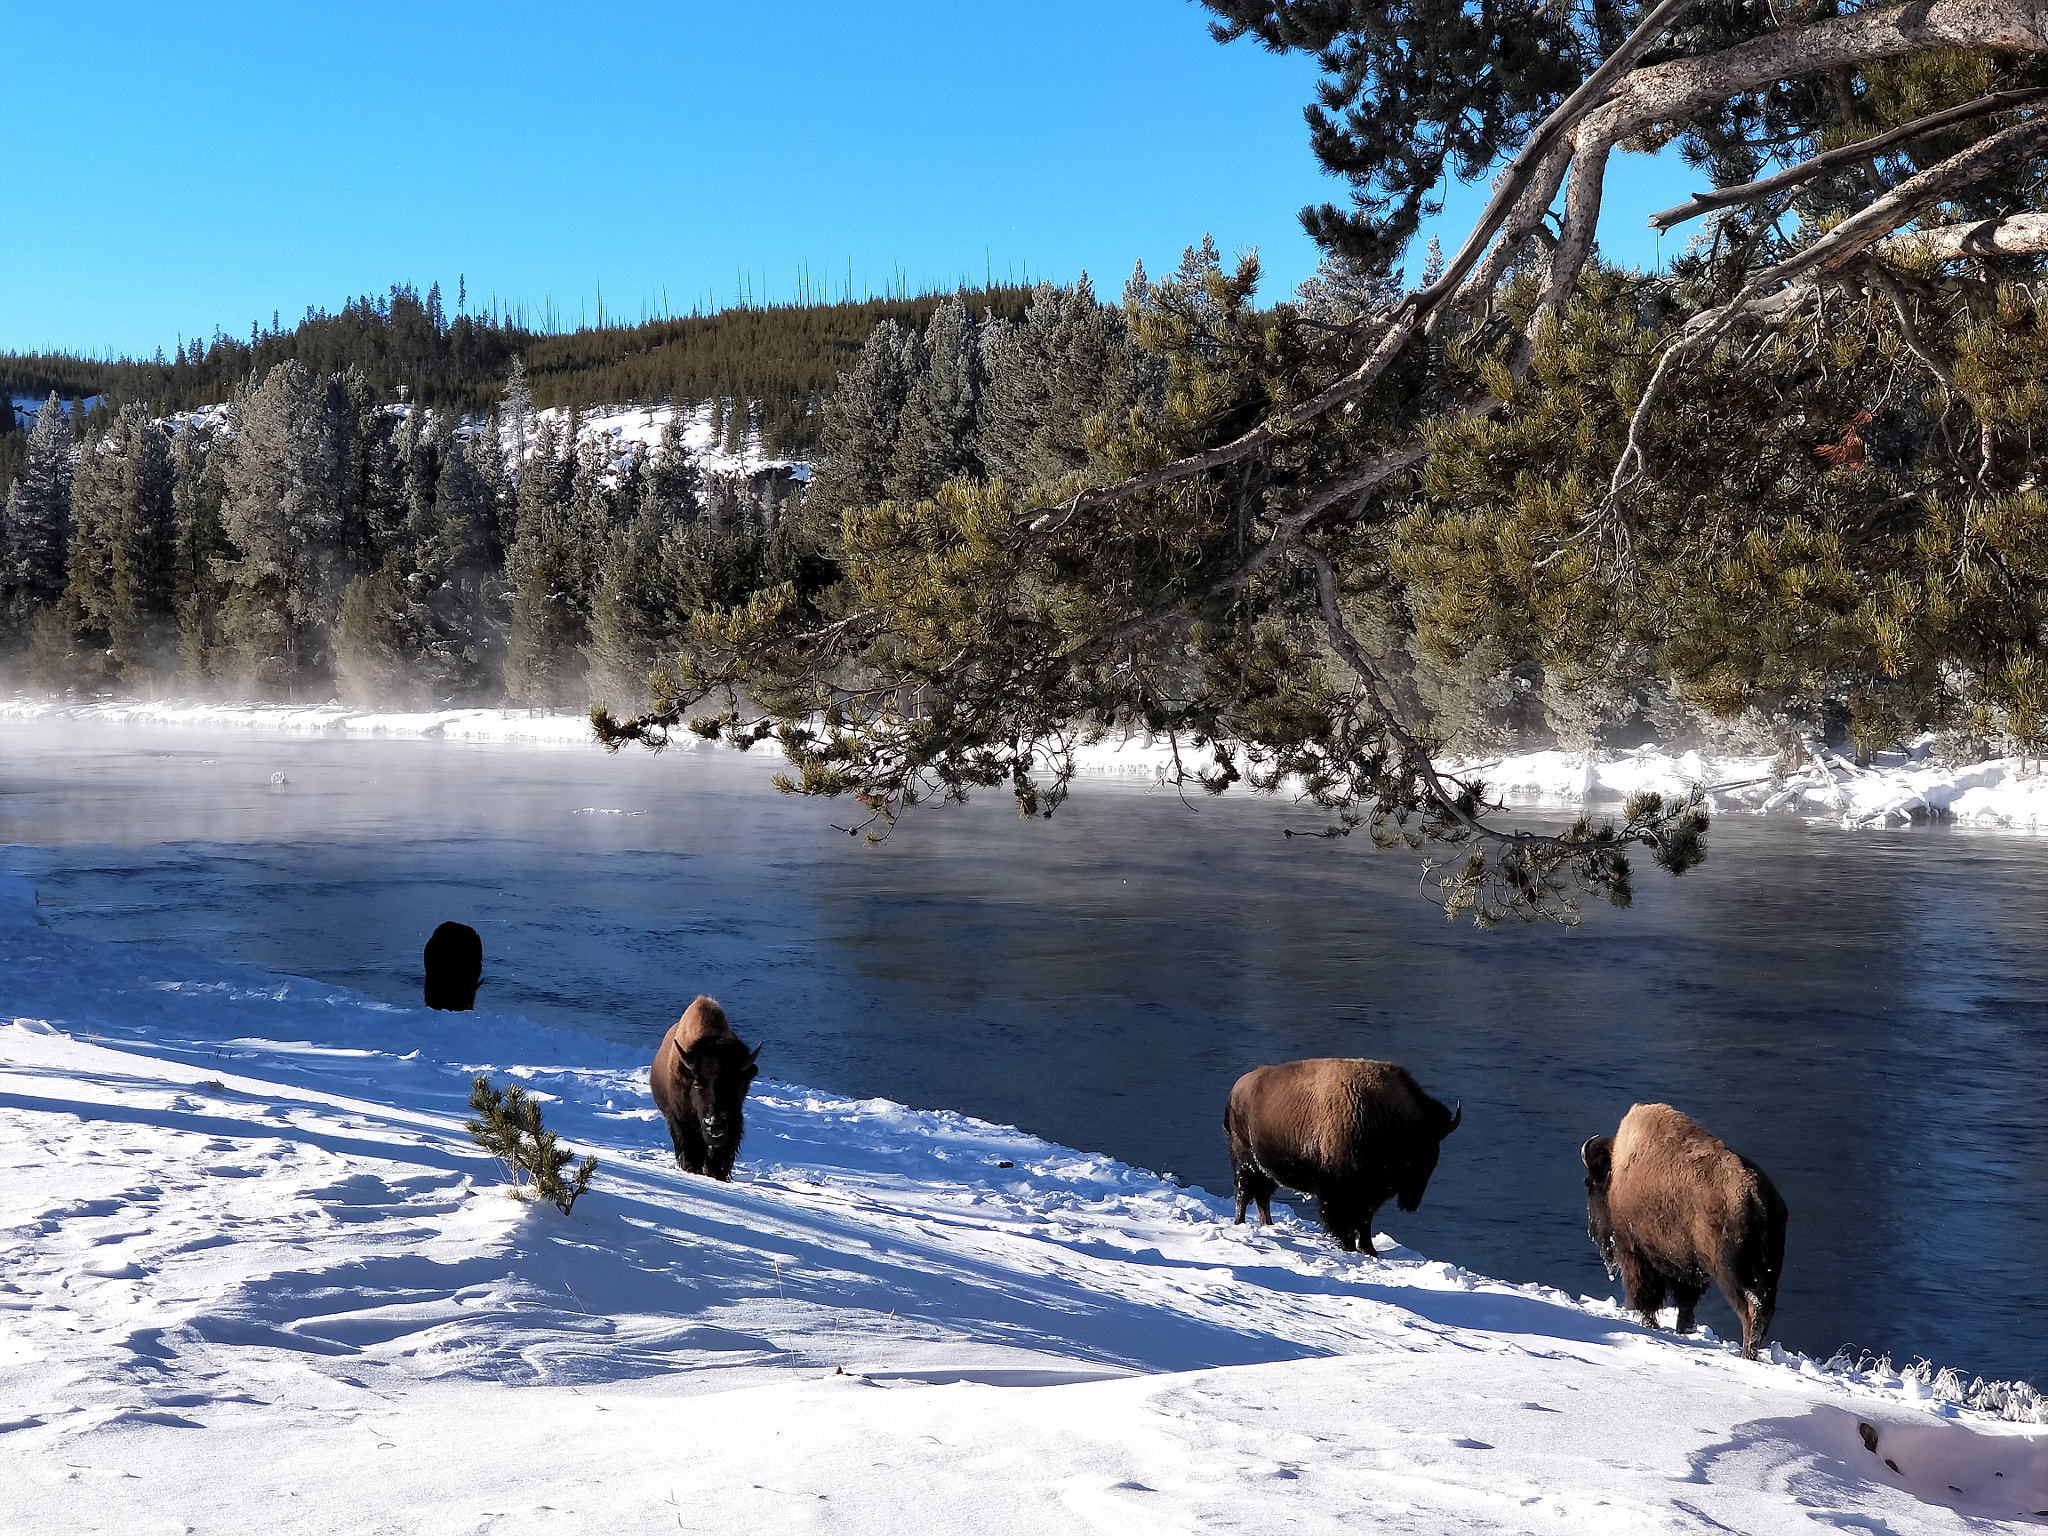 OPPO R11 PLUS sample photo. Yellowstone in winter photography